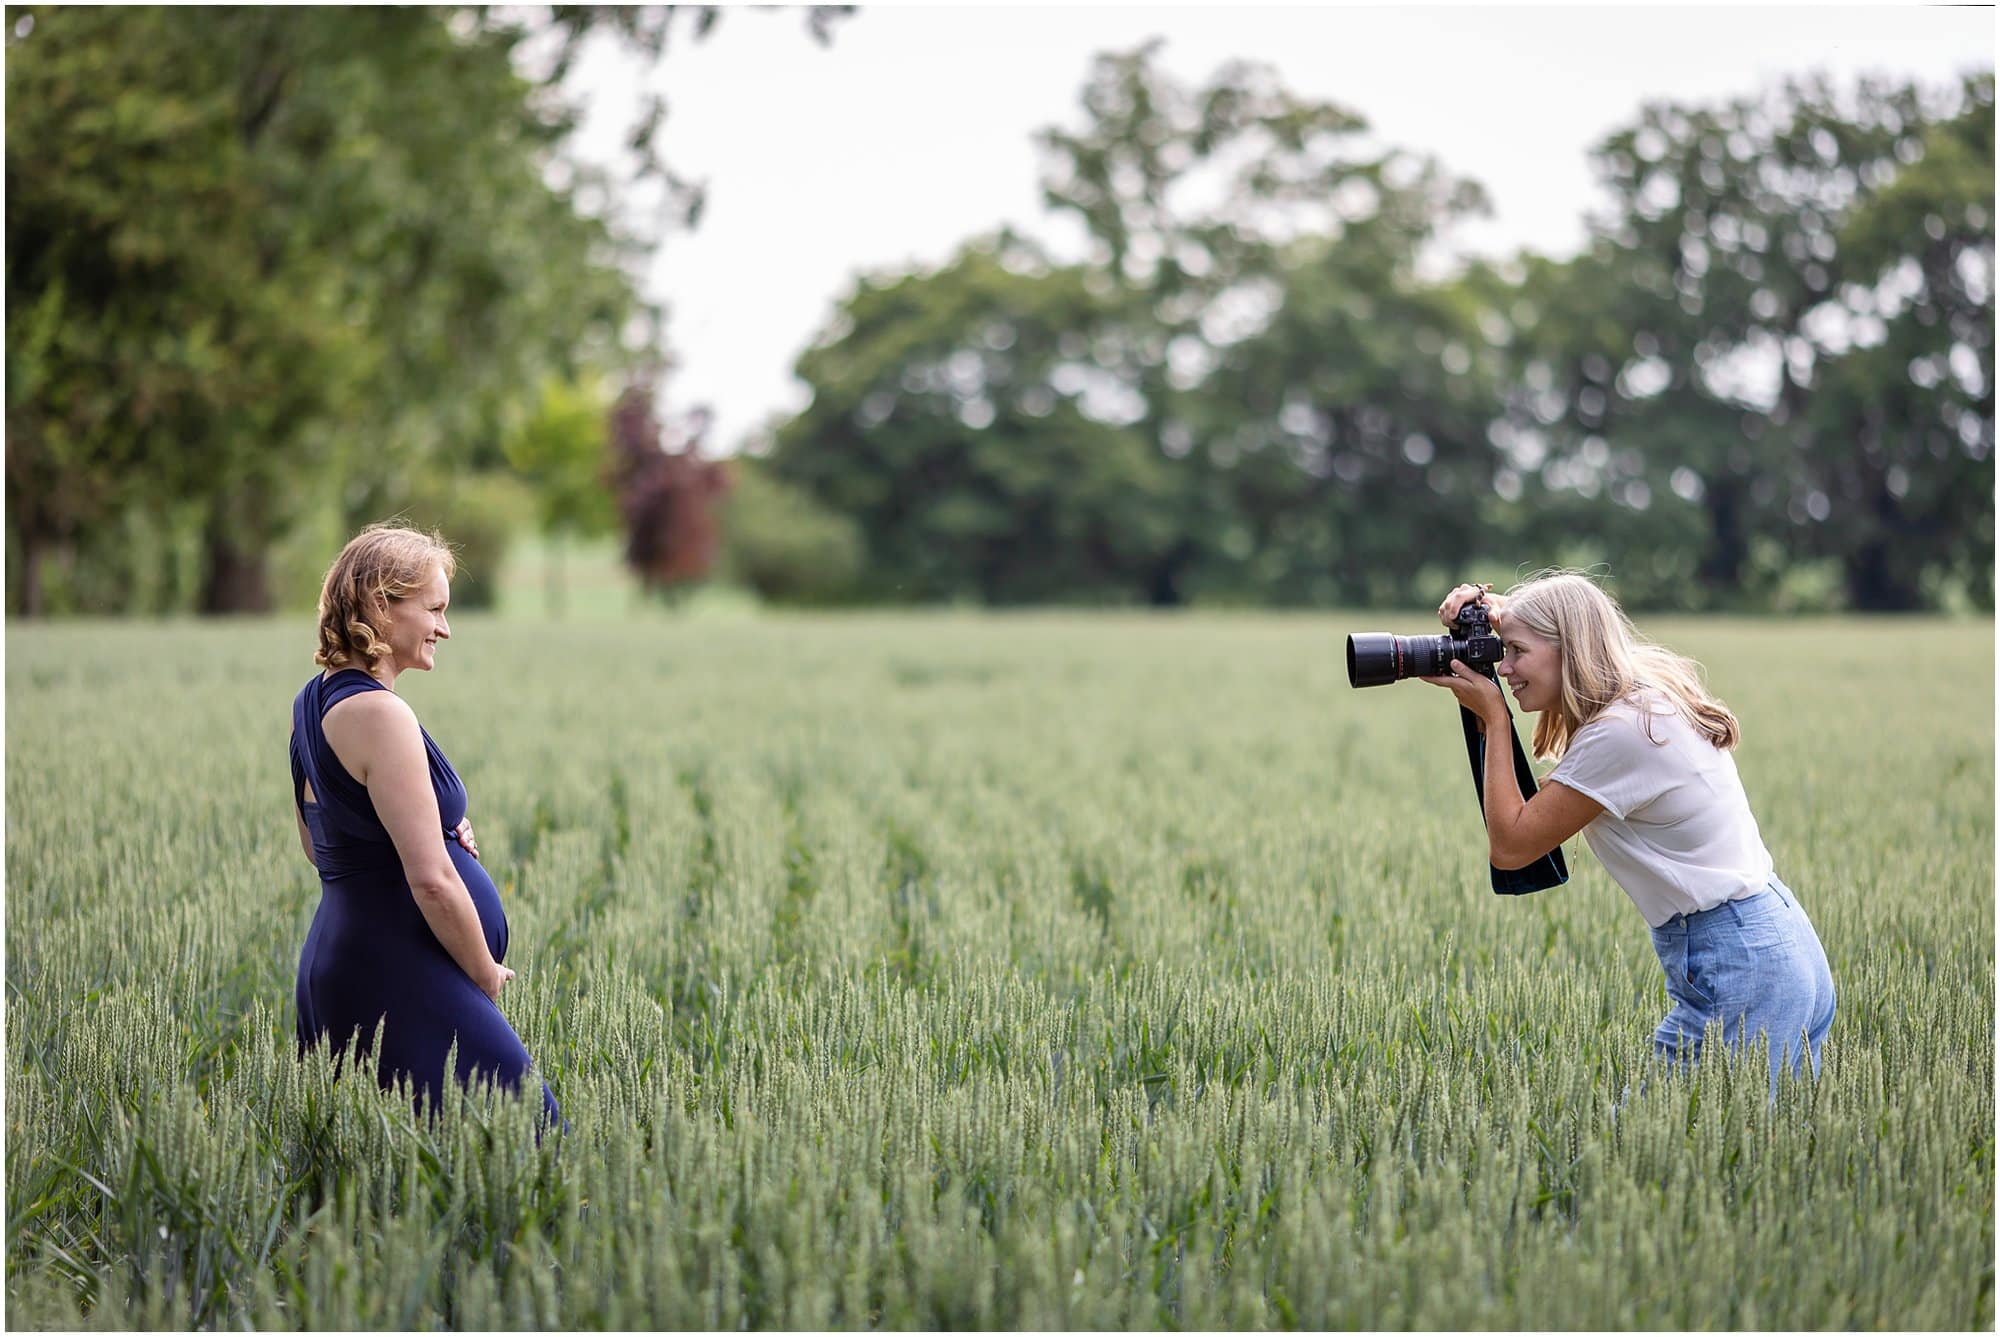 Behind the scenes photo of Alison McKenny photographing a maternity shoot in a wheat field